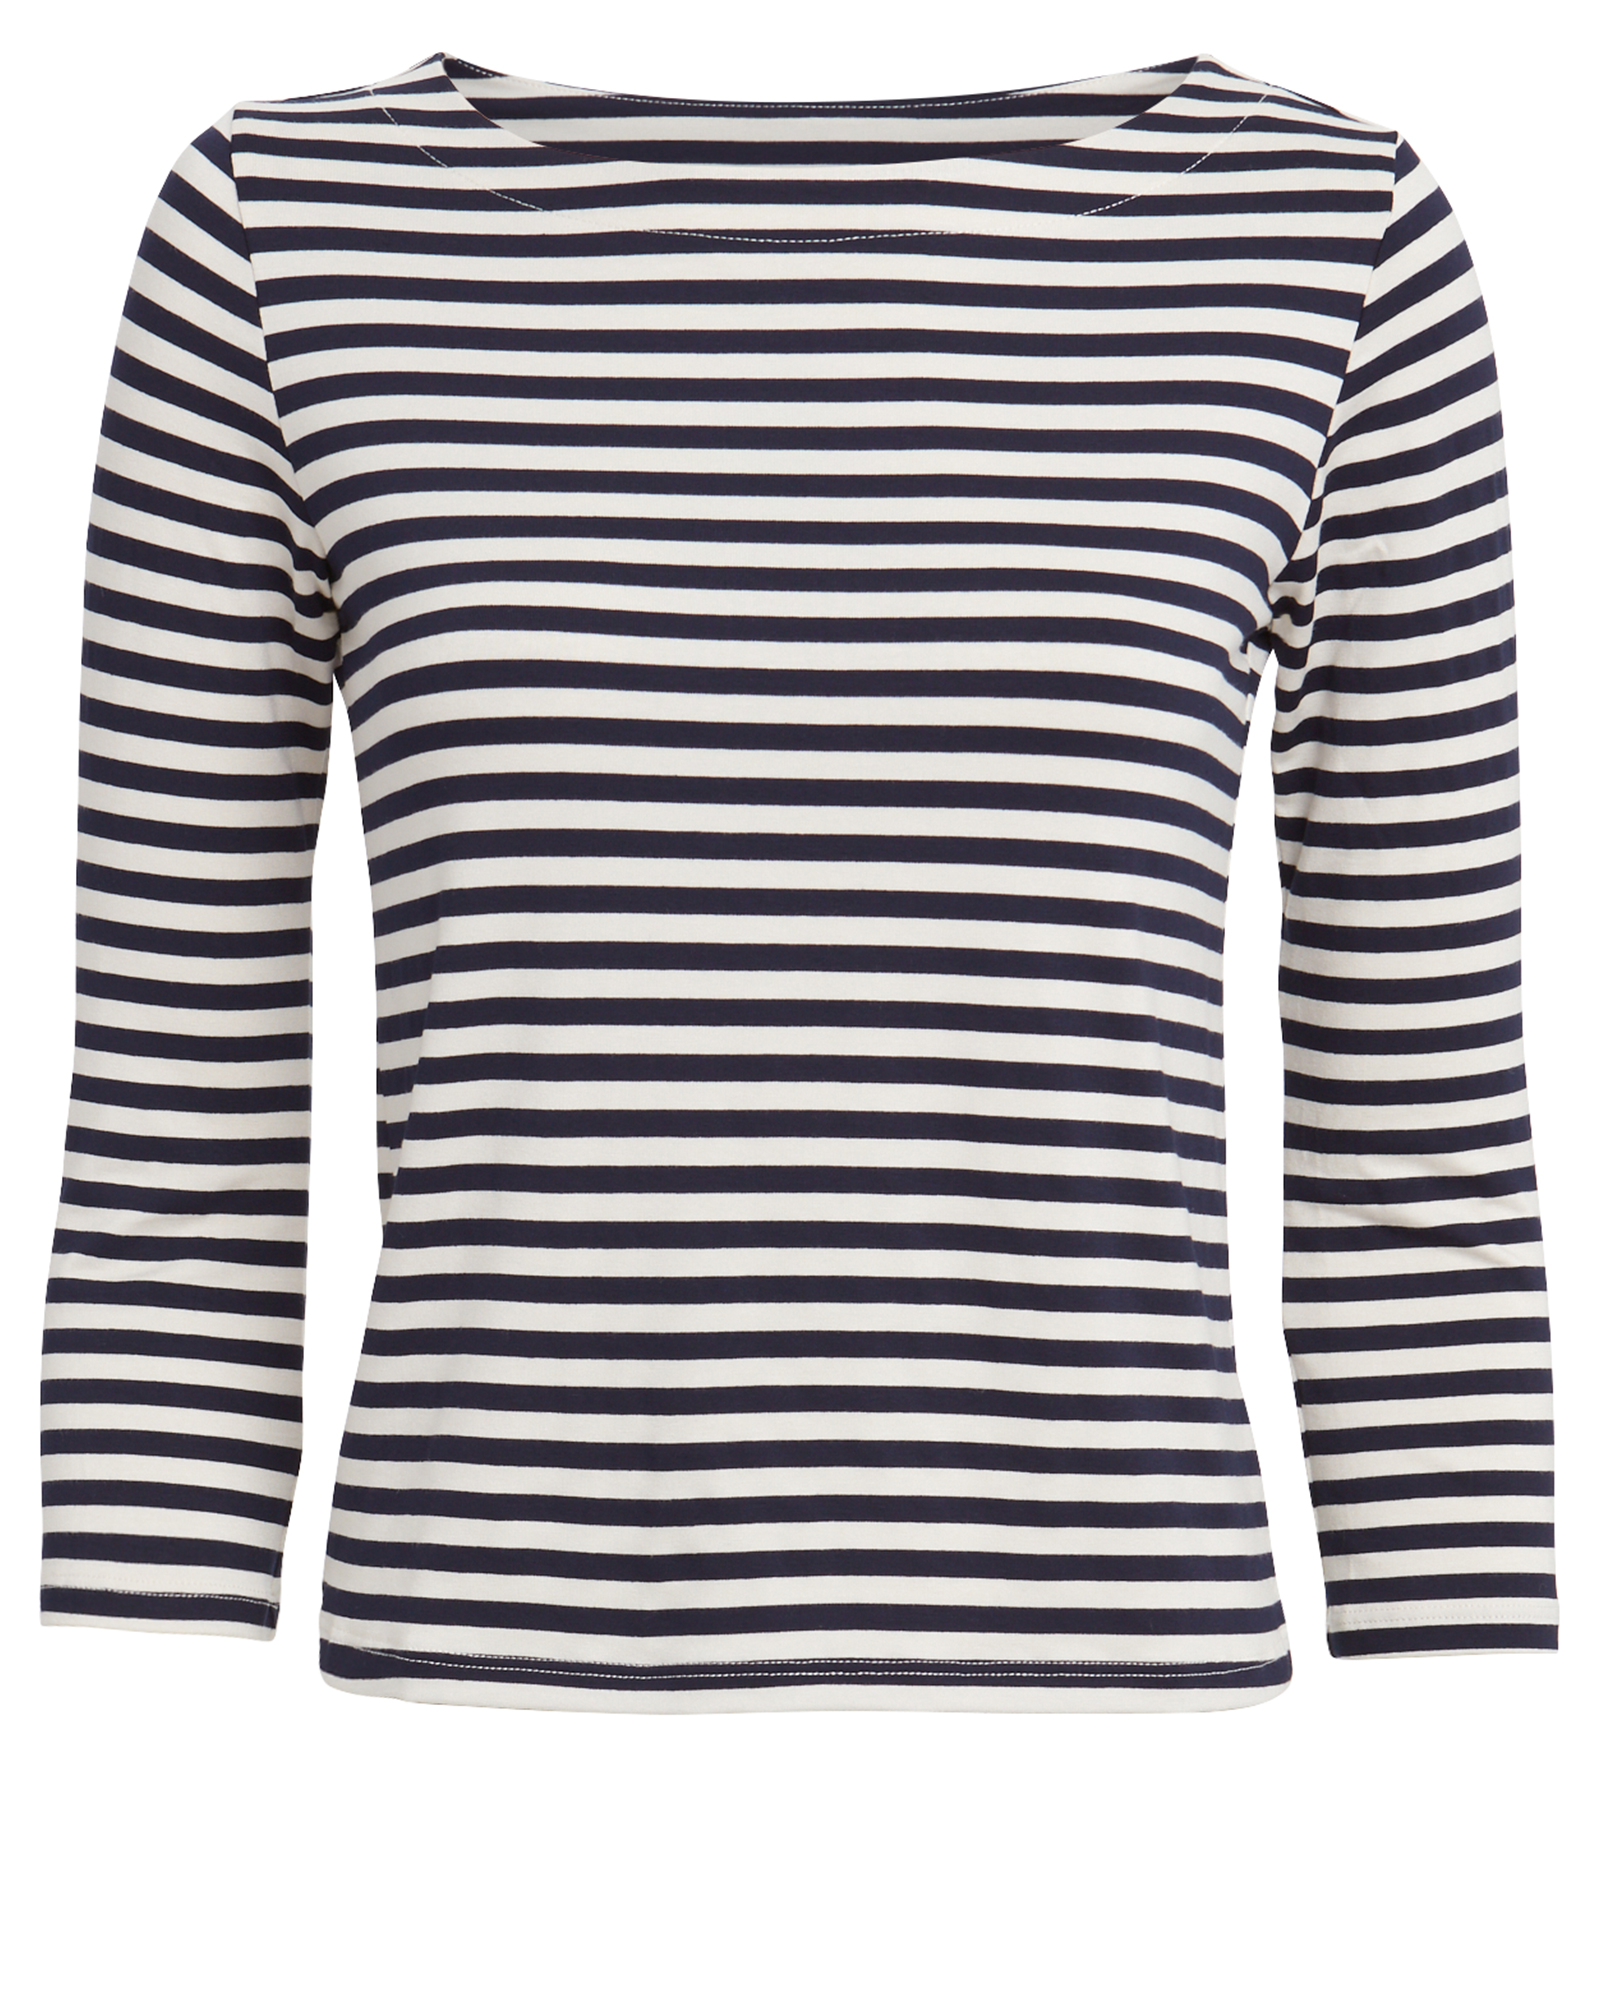 L Agence L'agence Lucy Striped Jersey Top In Multi | ModeSens